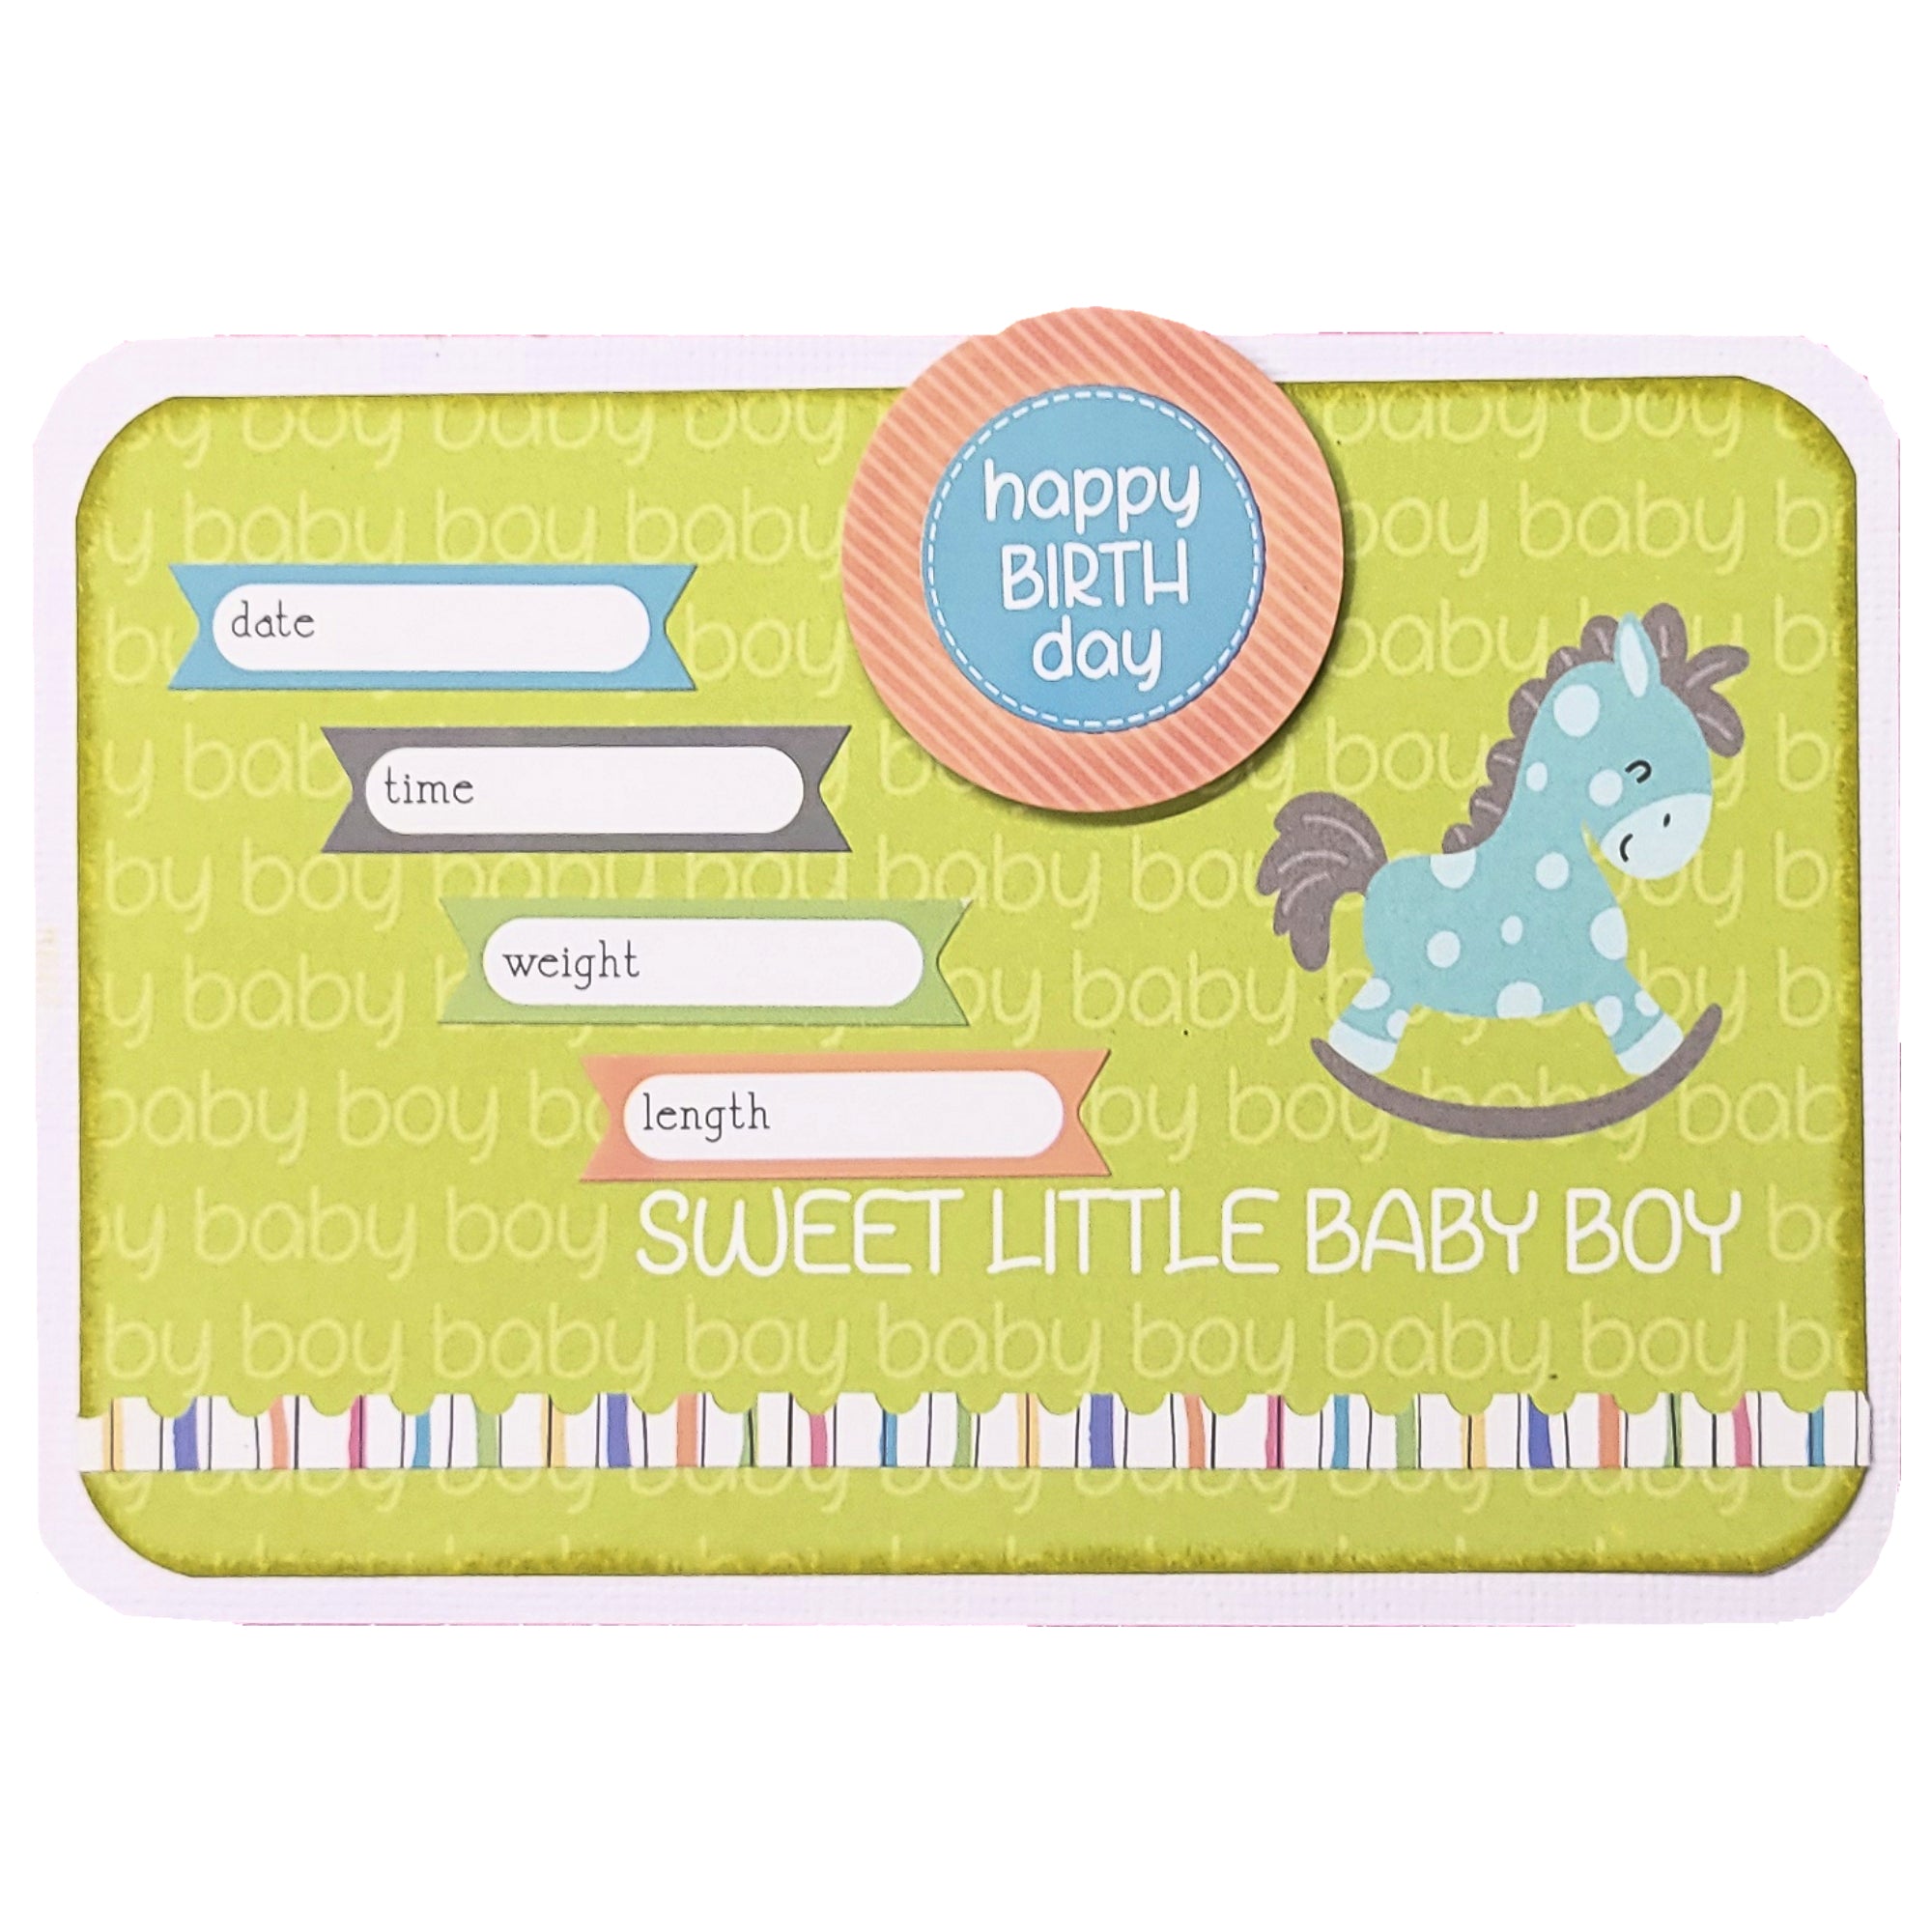 Hush Little Baby Collection 4 X 6 Happy Birthday Stats Scrapbook Embellishment by SSC Designs